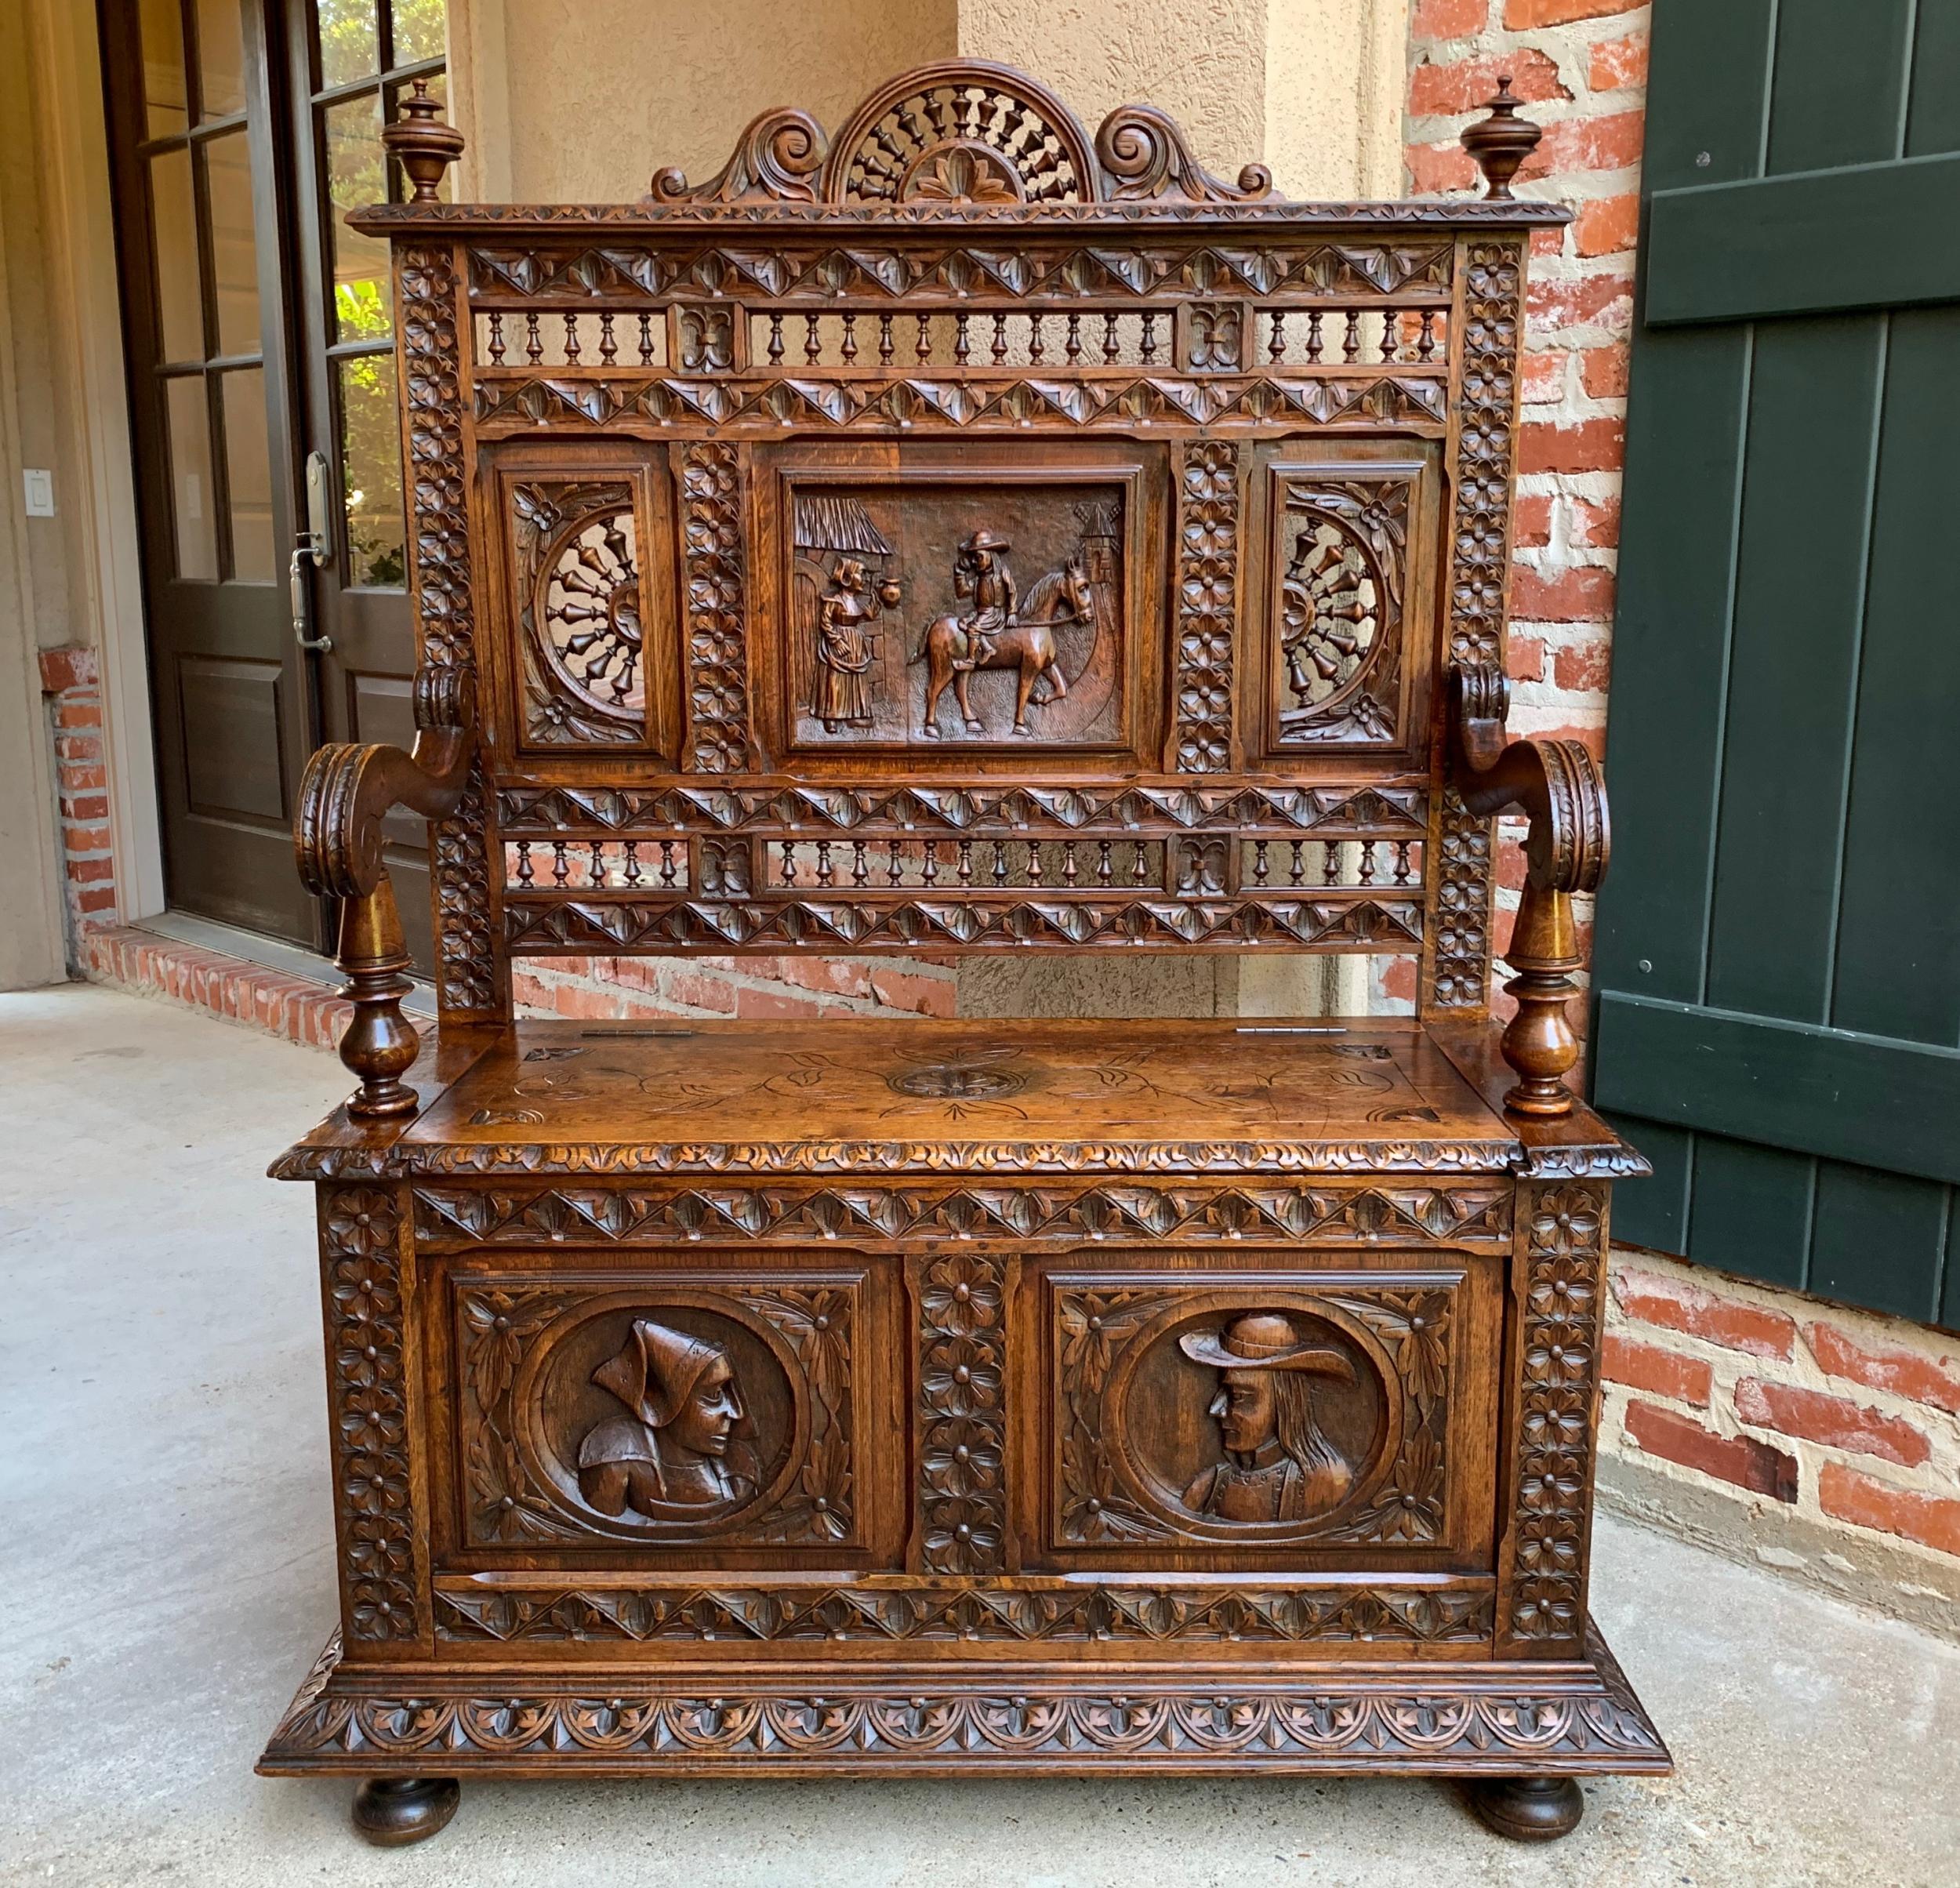 19th century French carved oak hall bench Breton Brittany Pew Banquette

~Direct from France~
~Ornately hand carved antique French hall bench in an extremely versatile small size!~
~Highly carved and spindled back, with a detailed carved panel